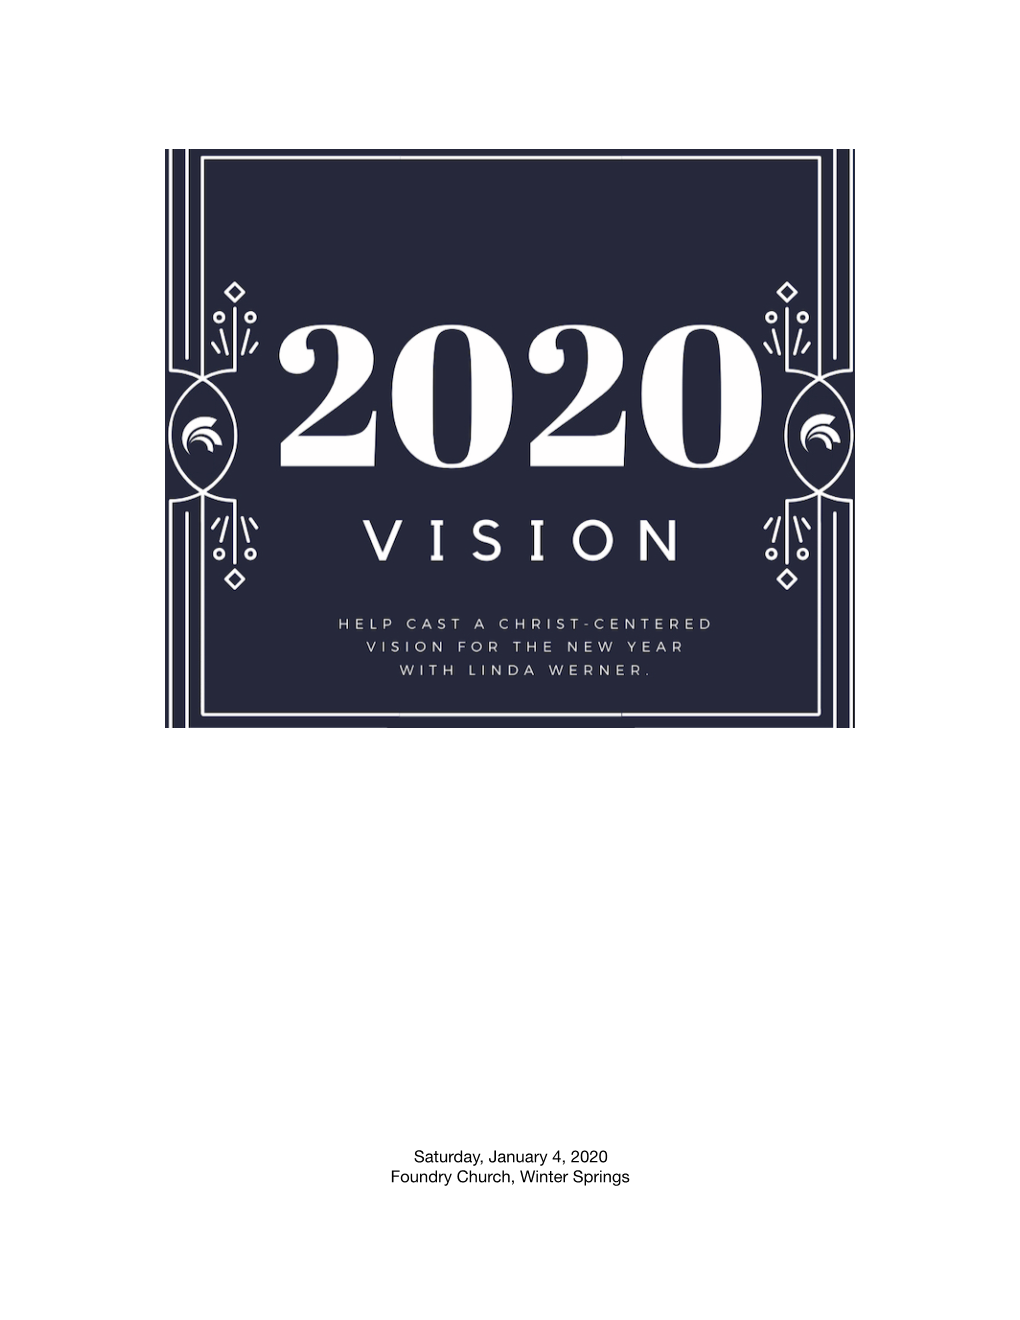 Saturday, January 4, 2020 Foundry Church, Winter Springs Notes a 2020 Vision Te Vision Exam What Do You See? What Adjustments Are Necessary? Clarity Brings Beauty